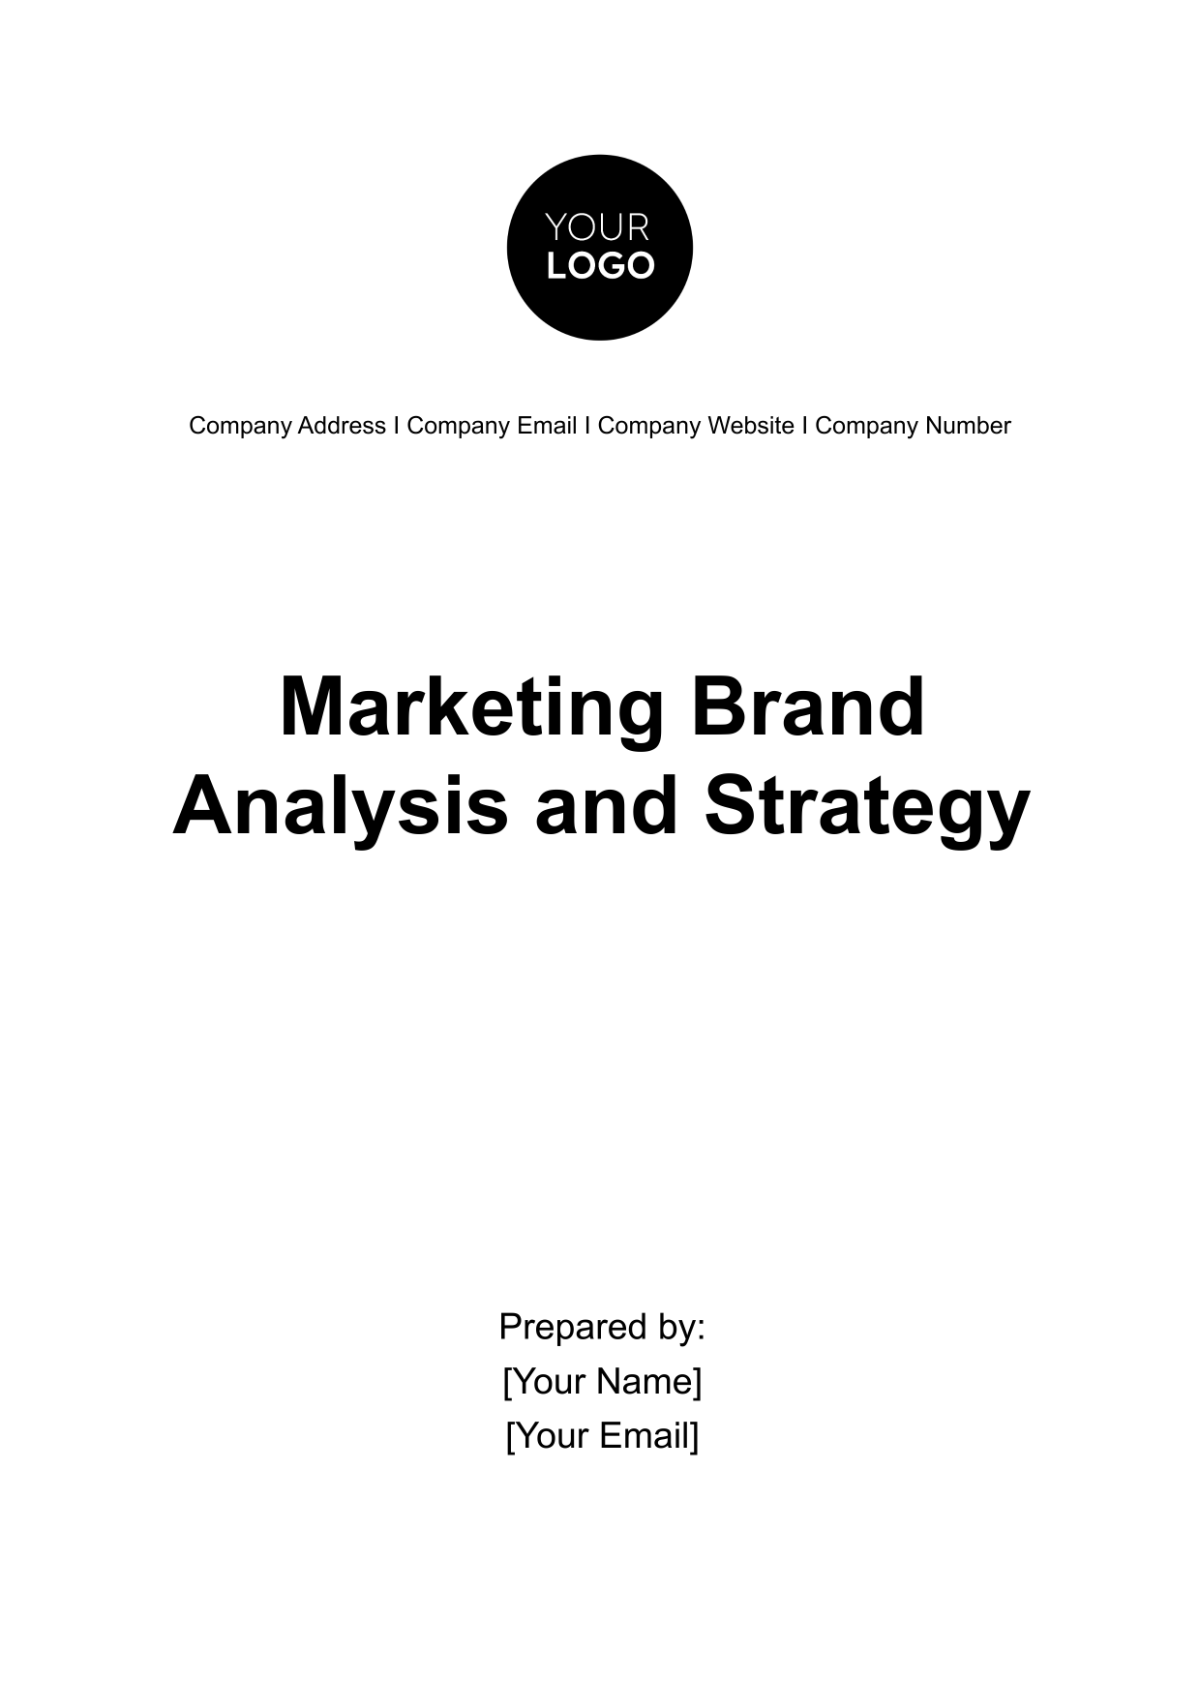 Marketing Brand Analysis and Strategy Template